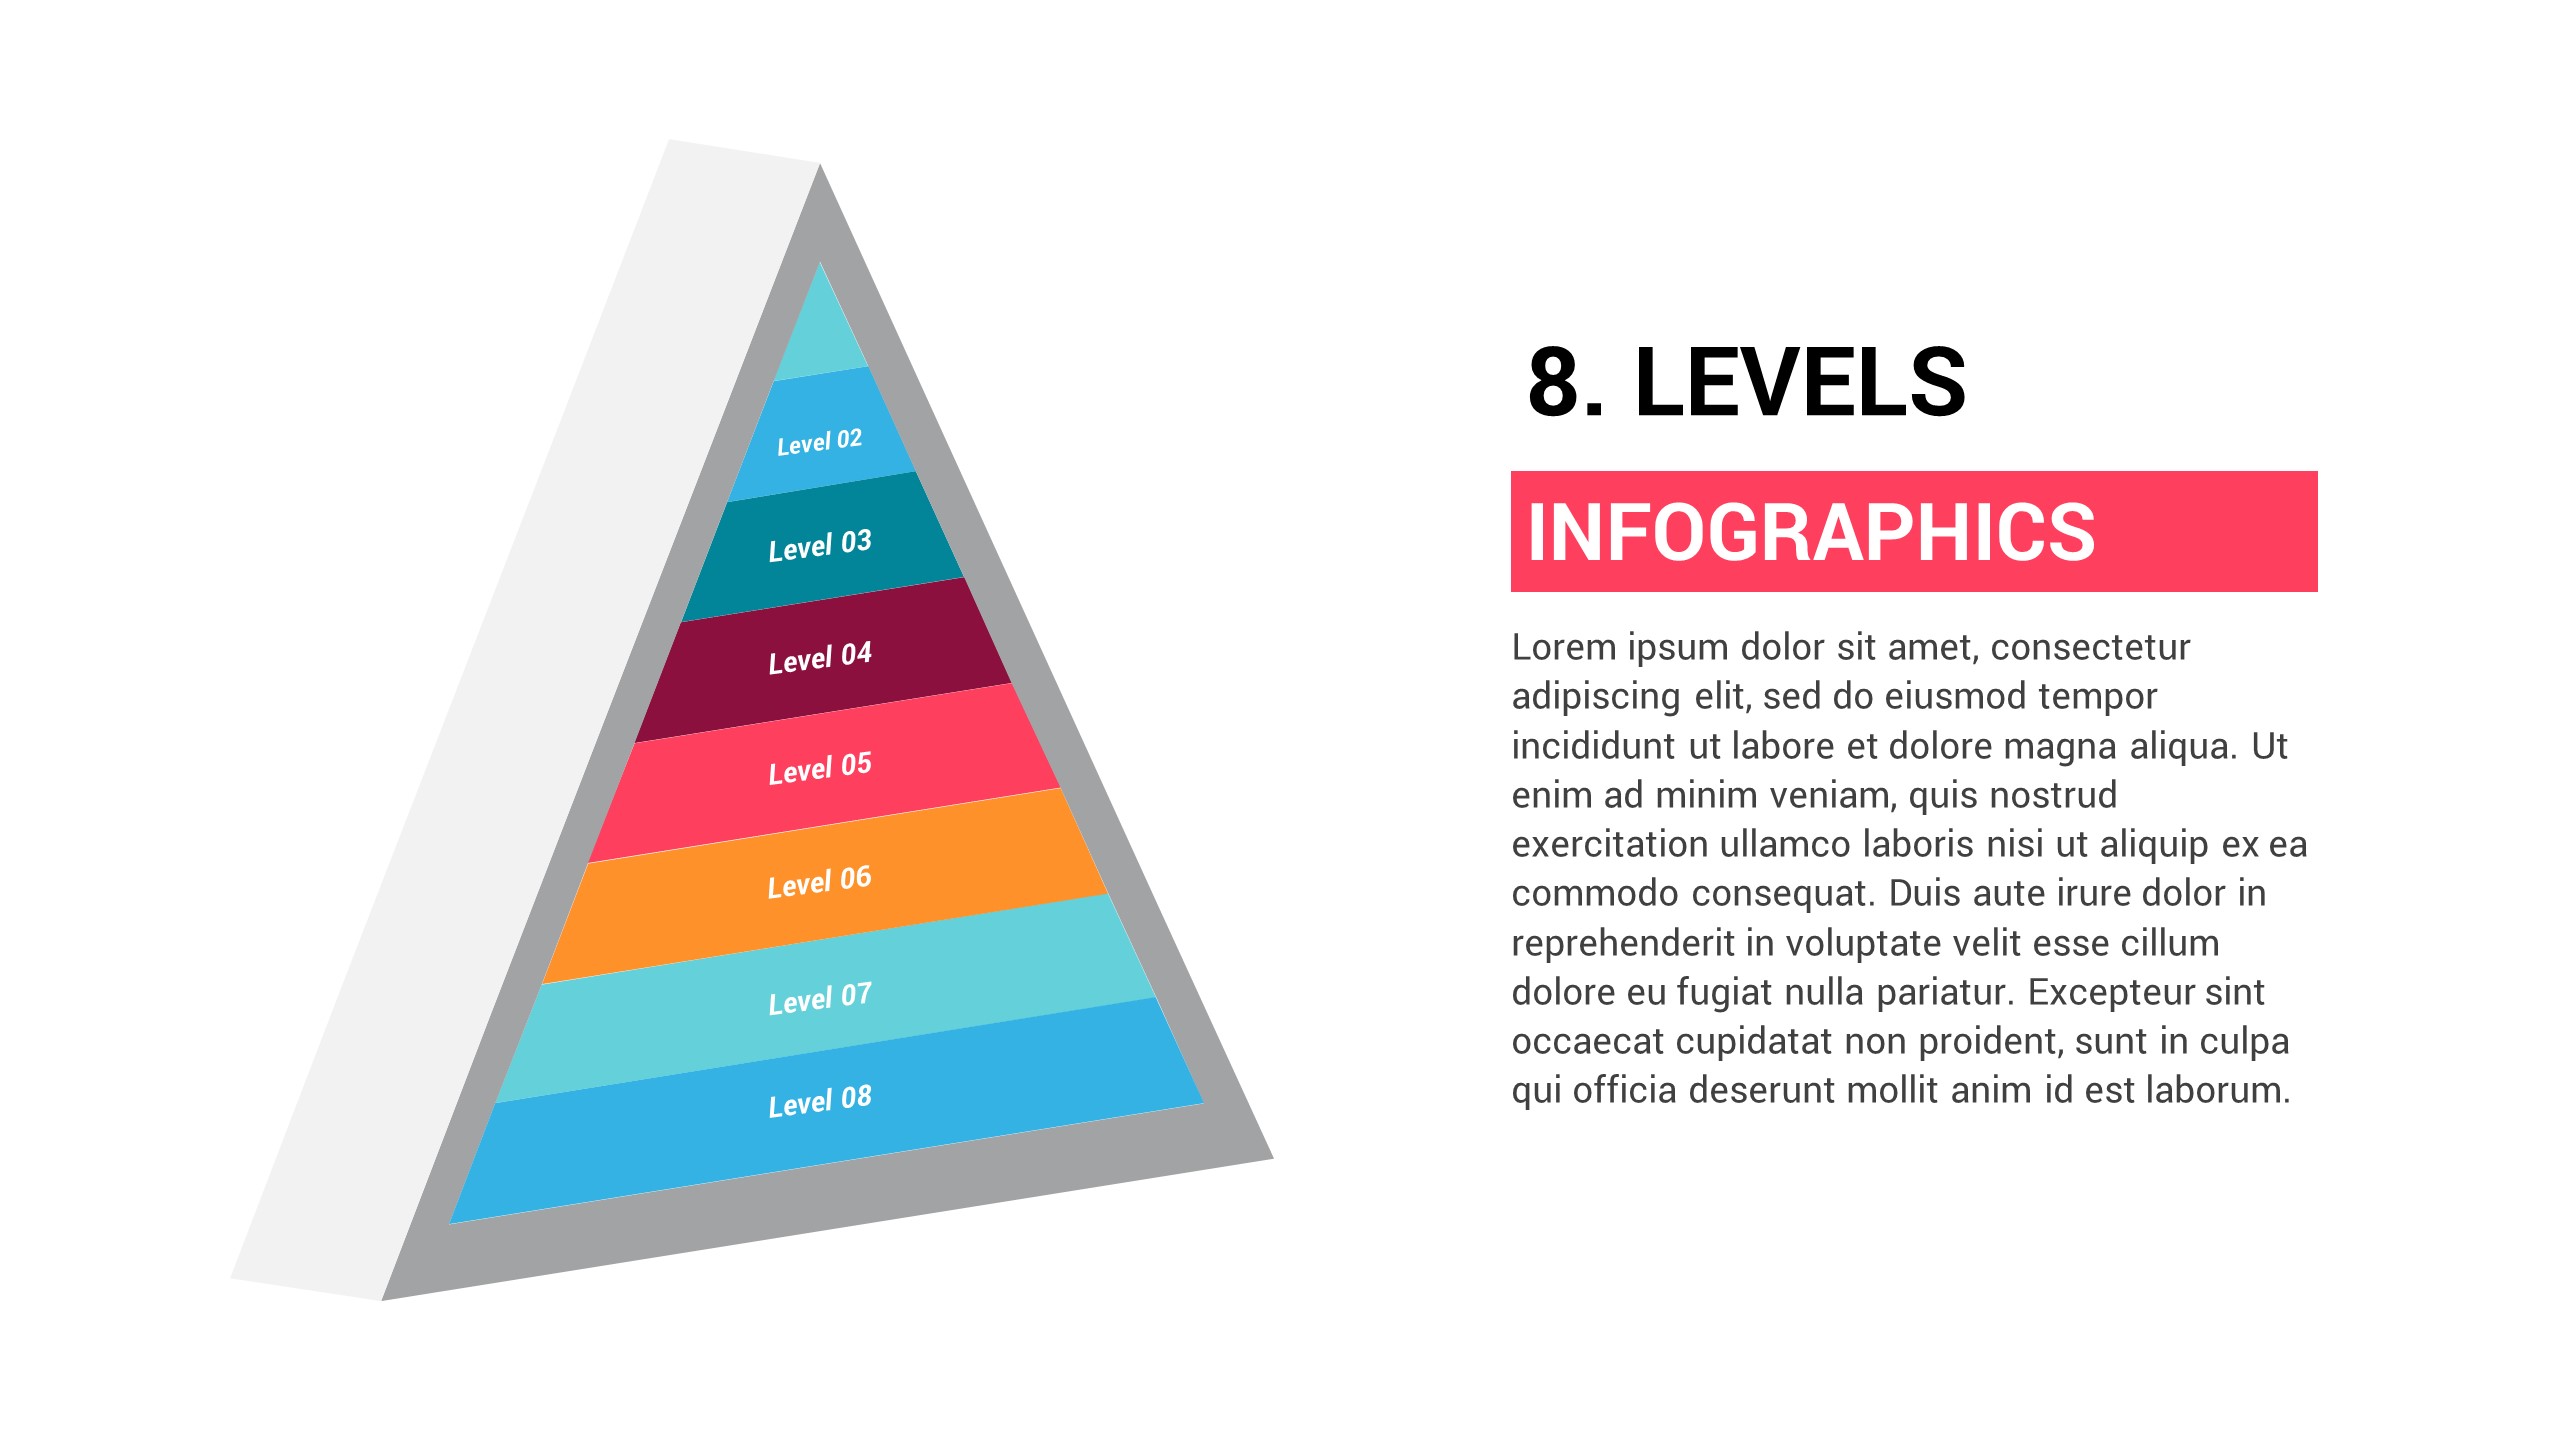 Free 3D Pyramid With 8 Levels PPTX Infographic